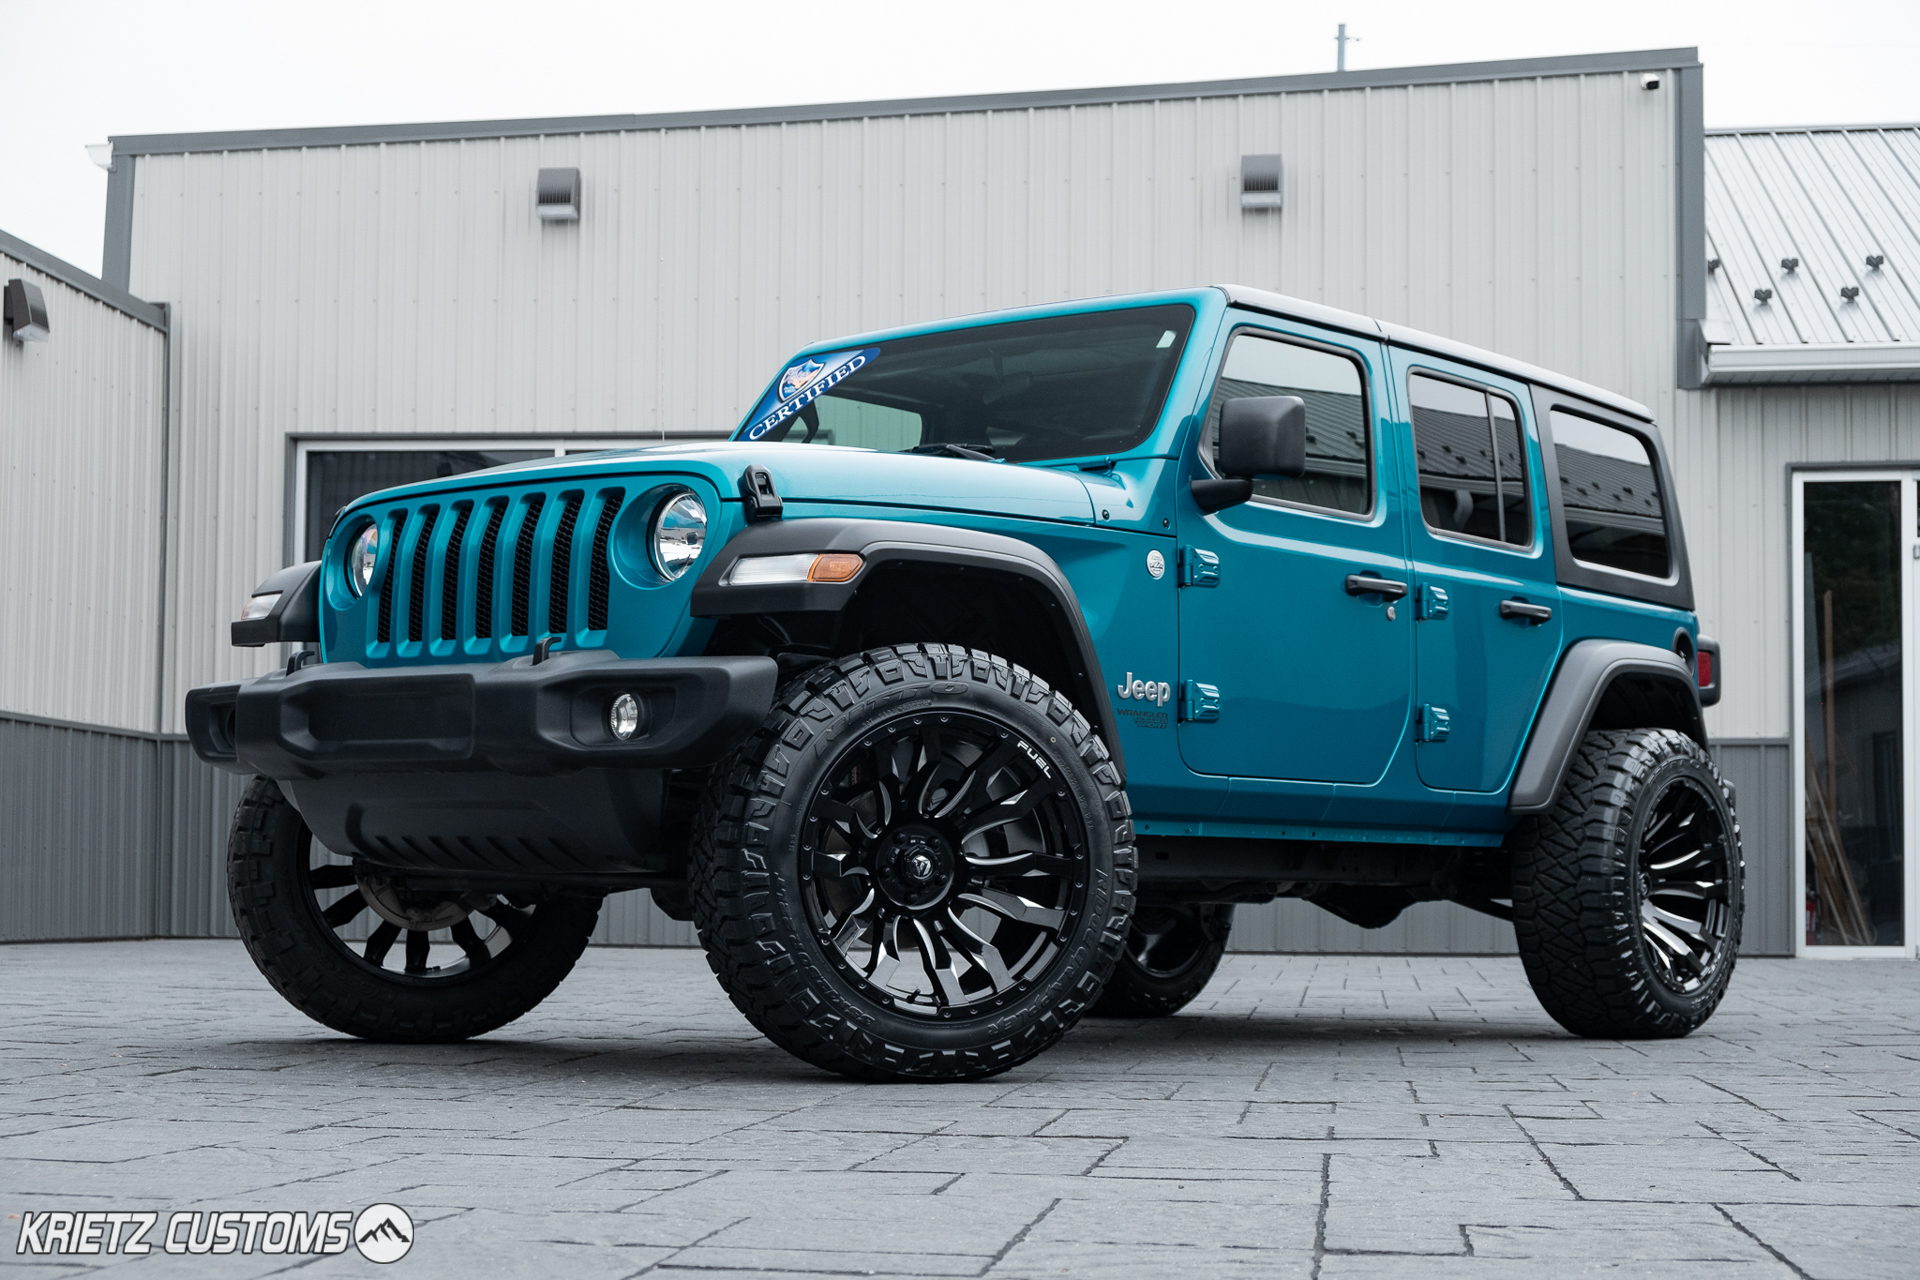 Lifted 2020 Jeep Wrangler with 22×12 Fuel Blitz Wheels and